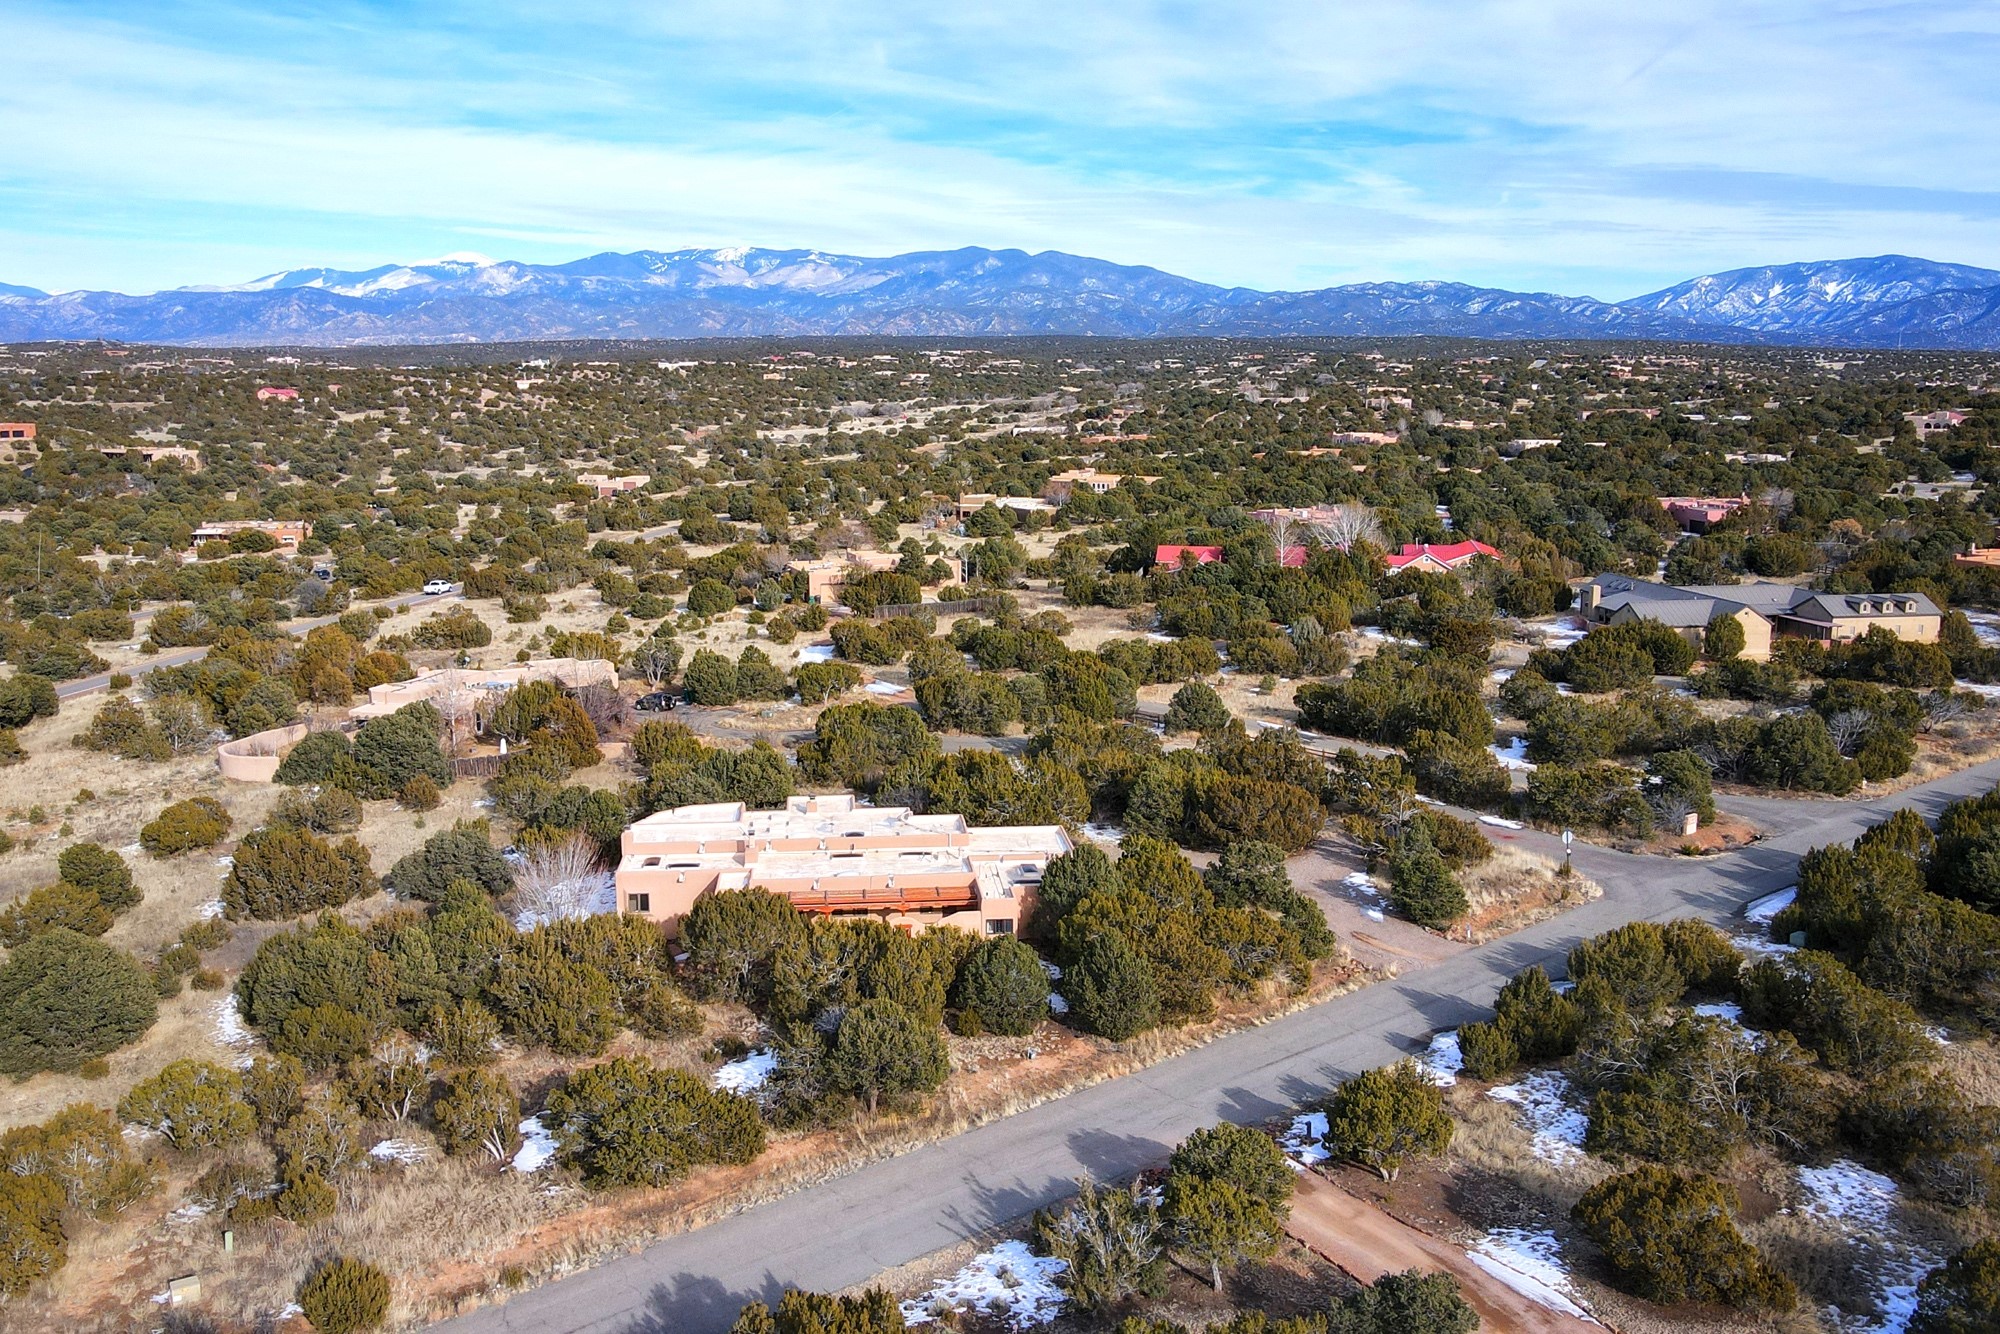 13 Blue Jay Drive, Santa Fe, New Mexico 87506, 3 Bedrooms Bedrooms, ,3 BathroomsBathrooms,Residential,For Sale,13 Blue Jay Drive,202234600